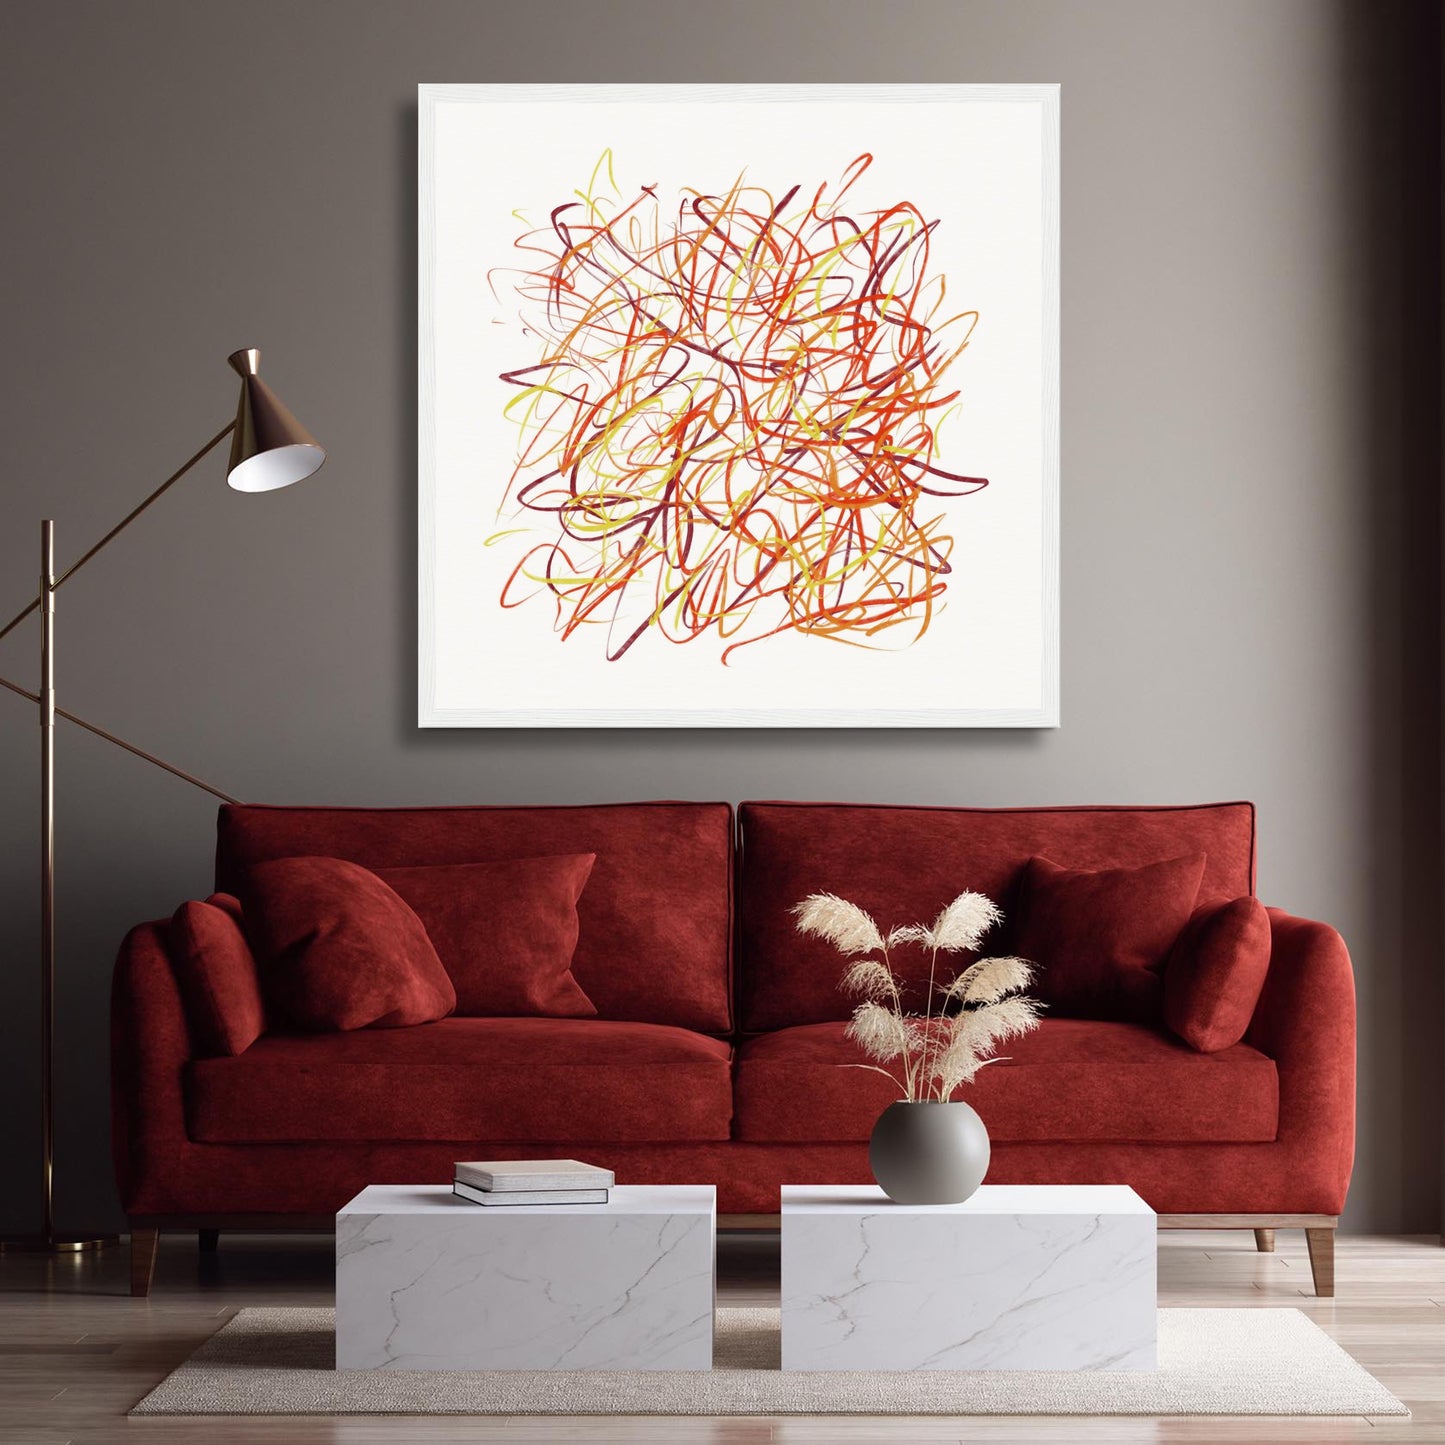 'Falling Leaves' abstract expressionist wall art